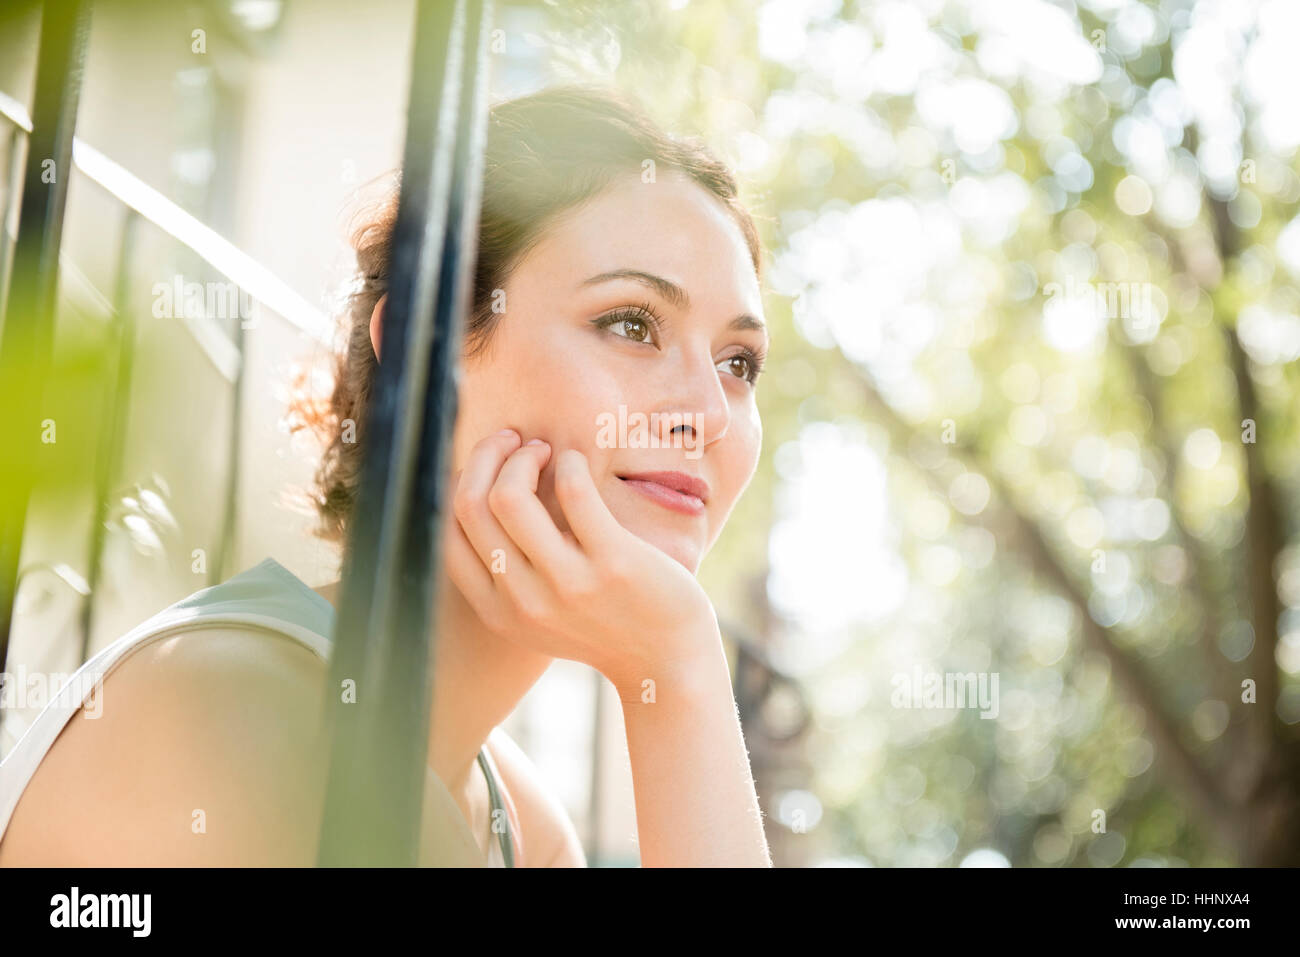 Pensive Thai woman with hand on chin Stock Photo